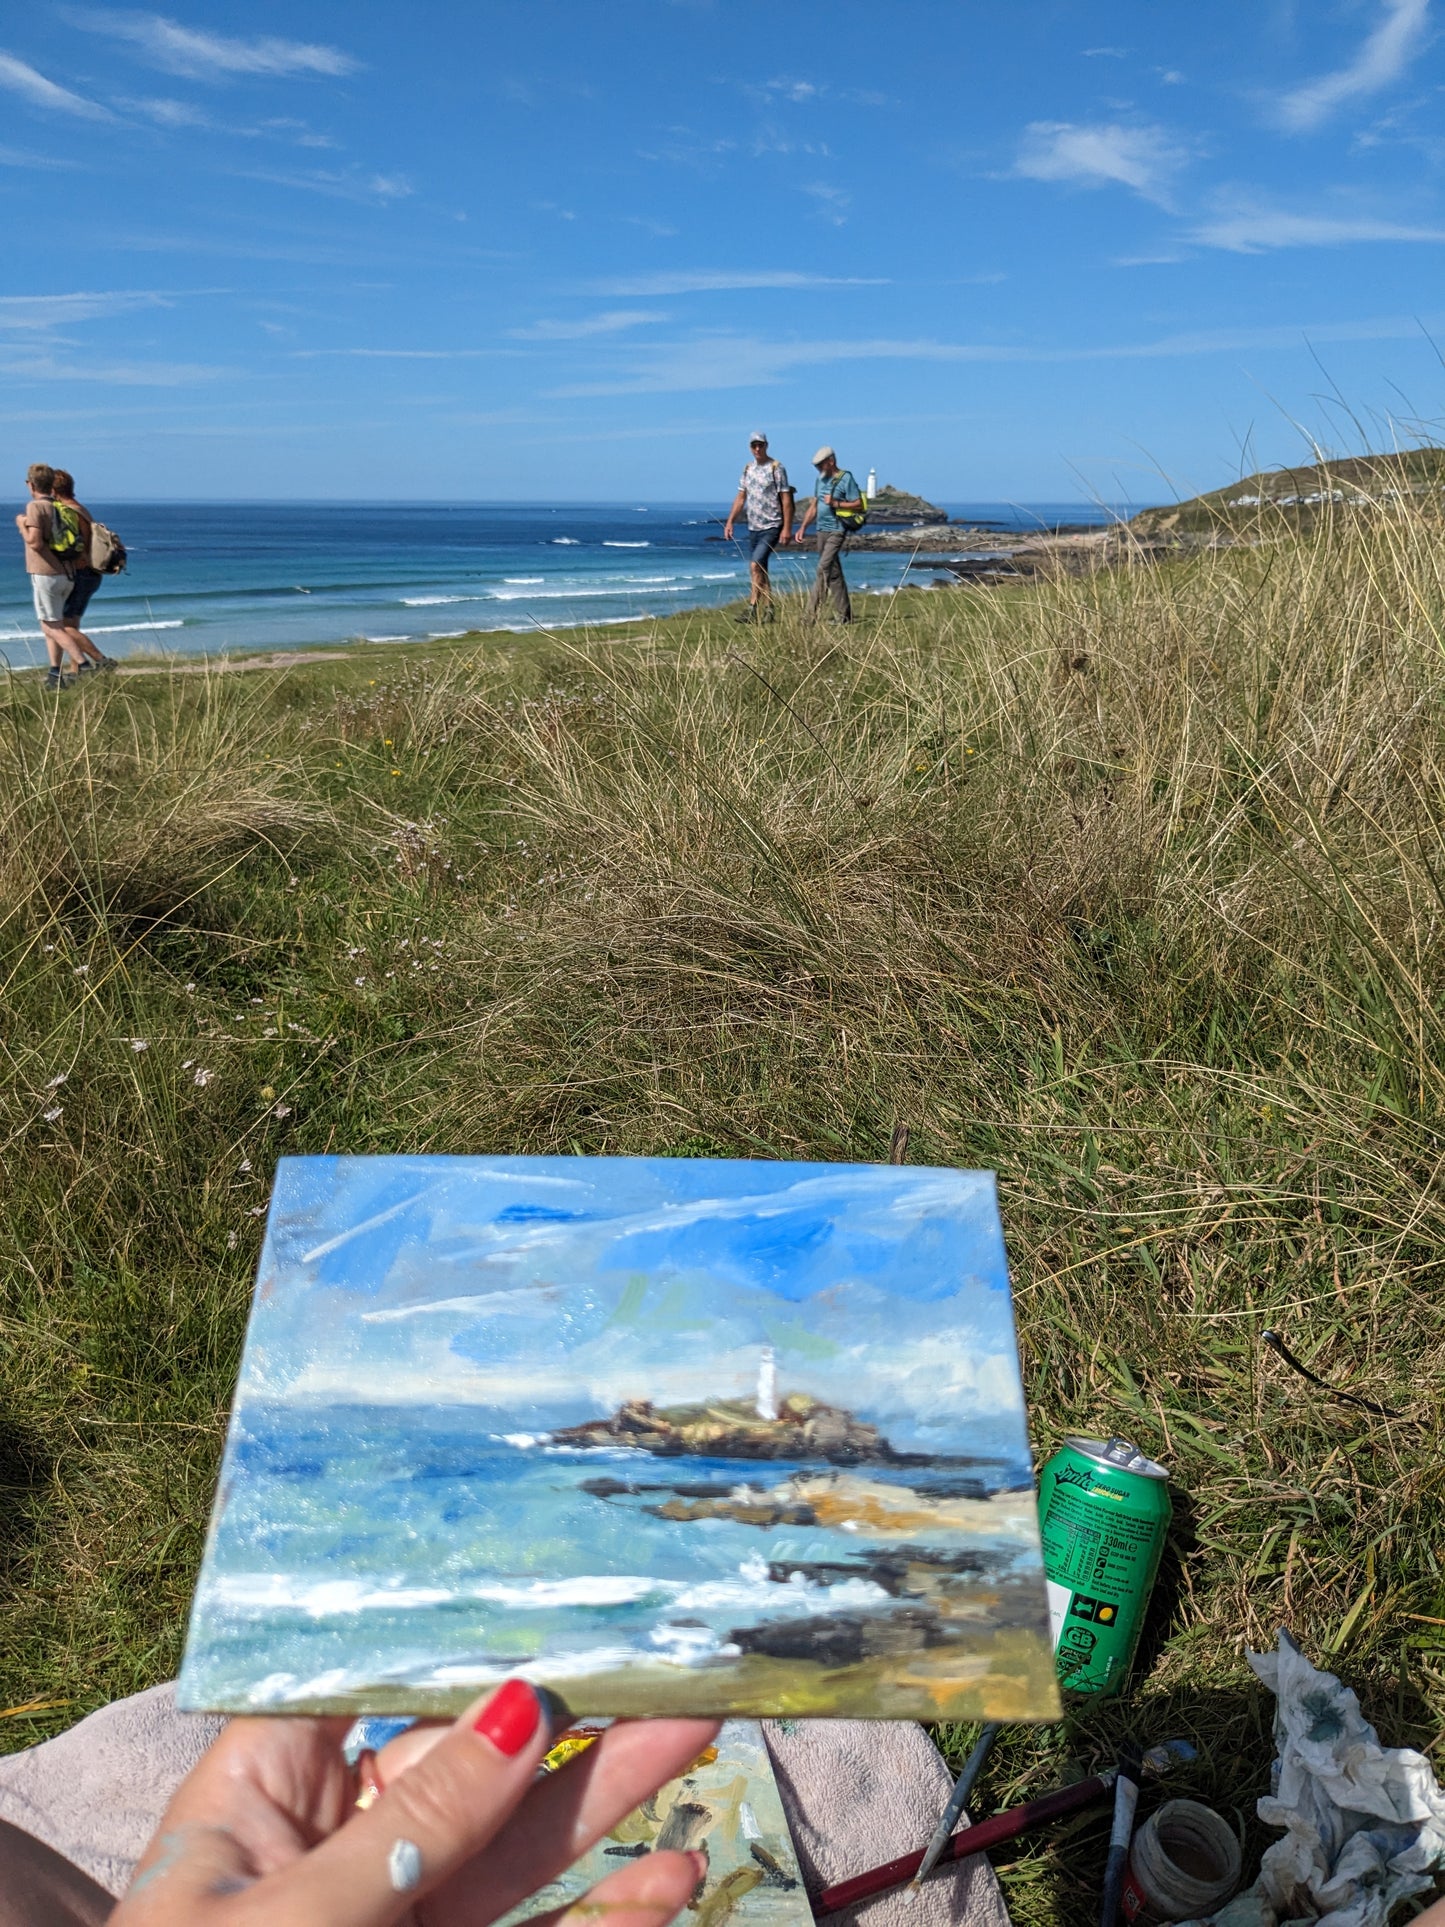 Godrevy Lighthouse from Gwithian [Highgate Contemporary Art November Anonymous Exhibition]